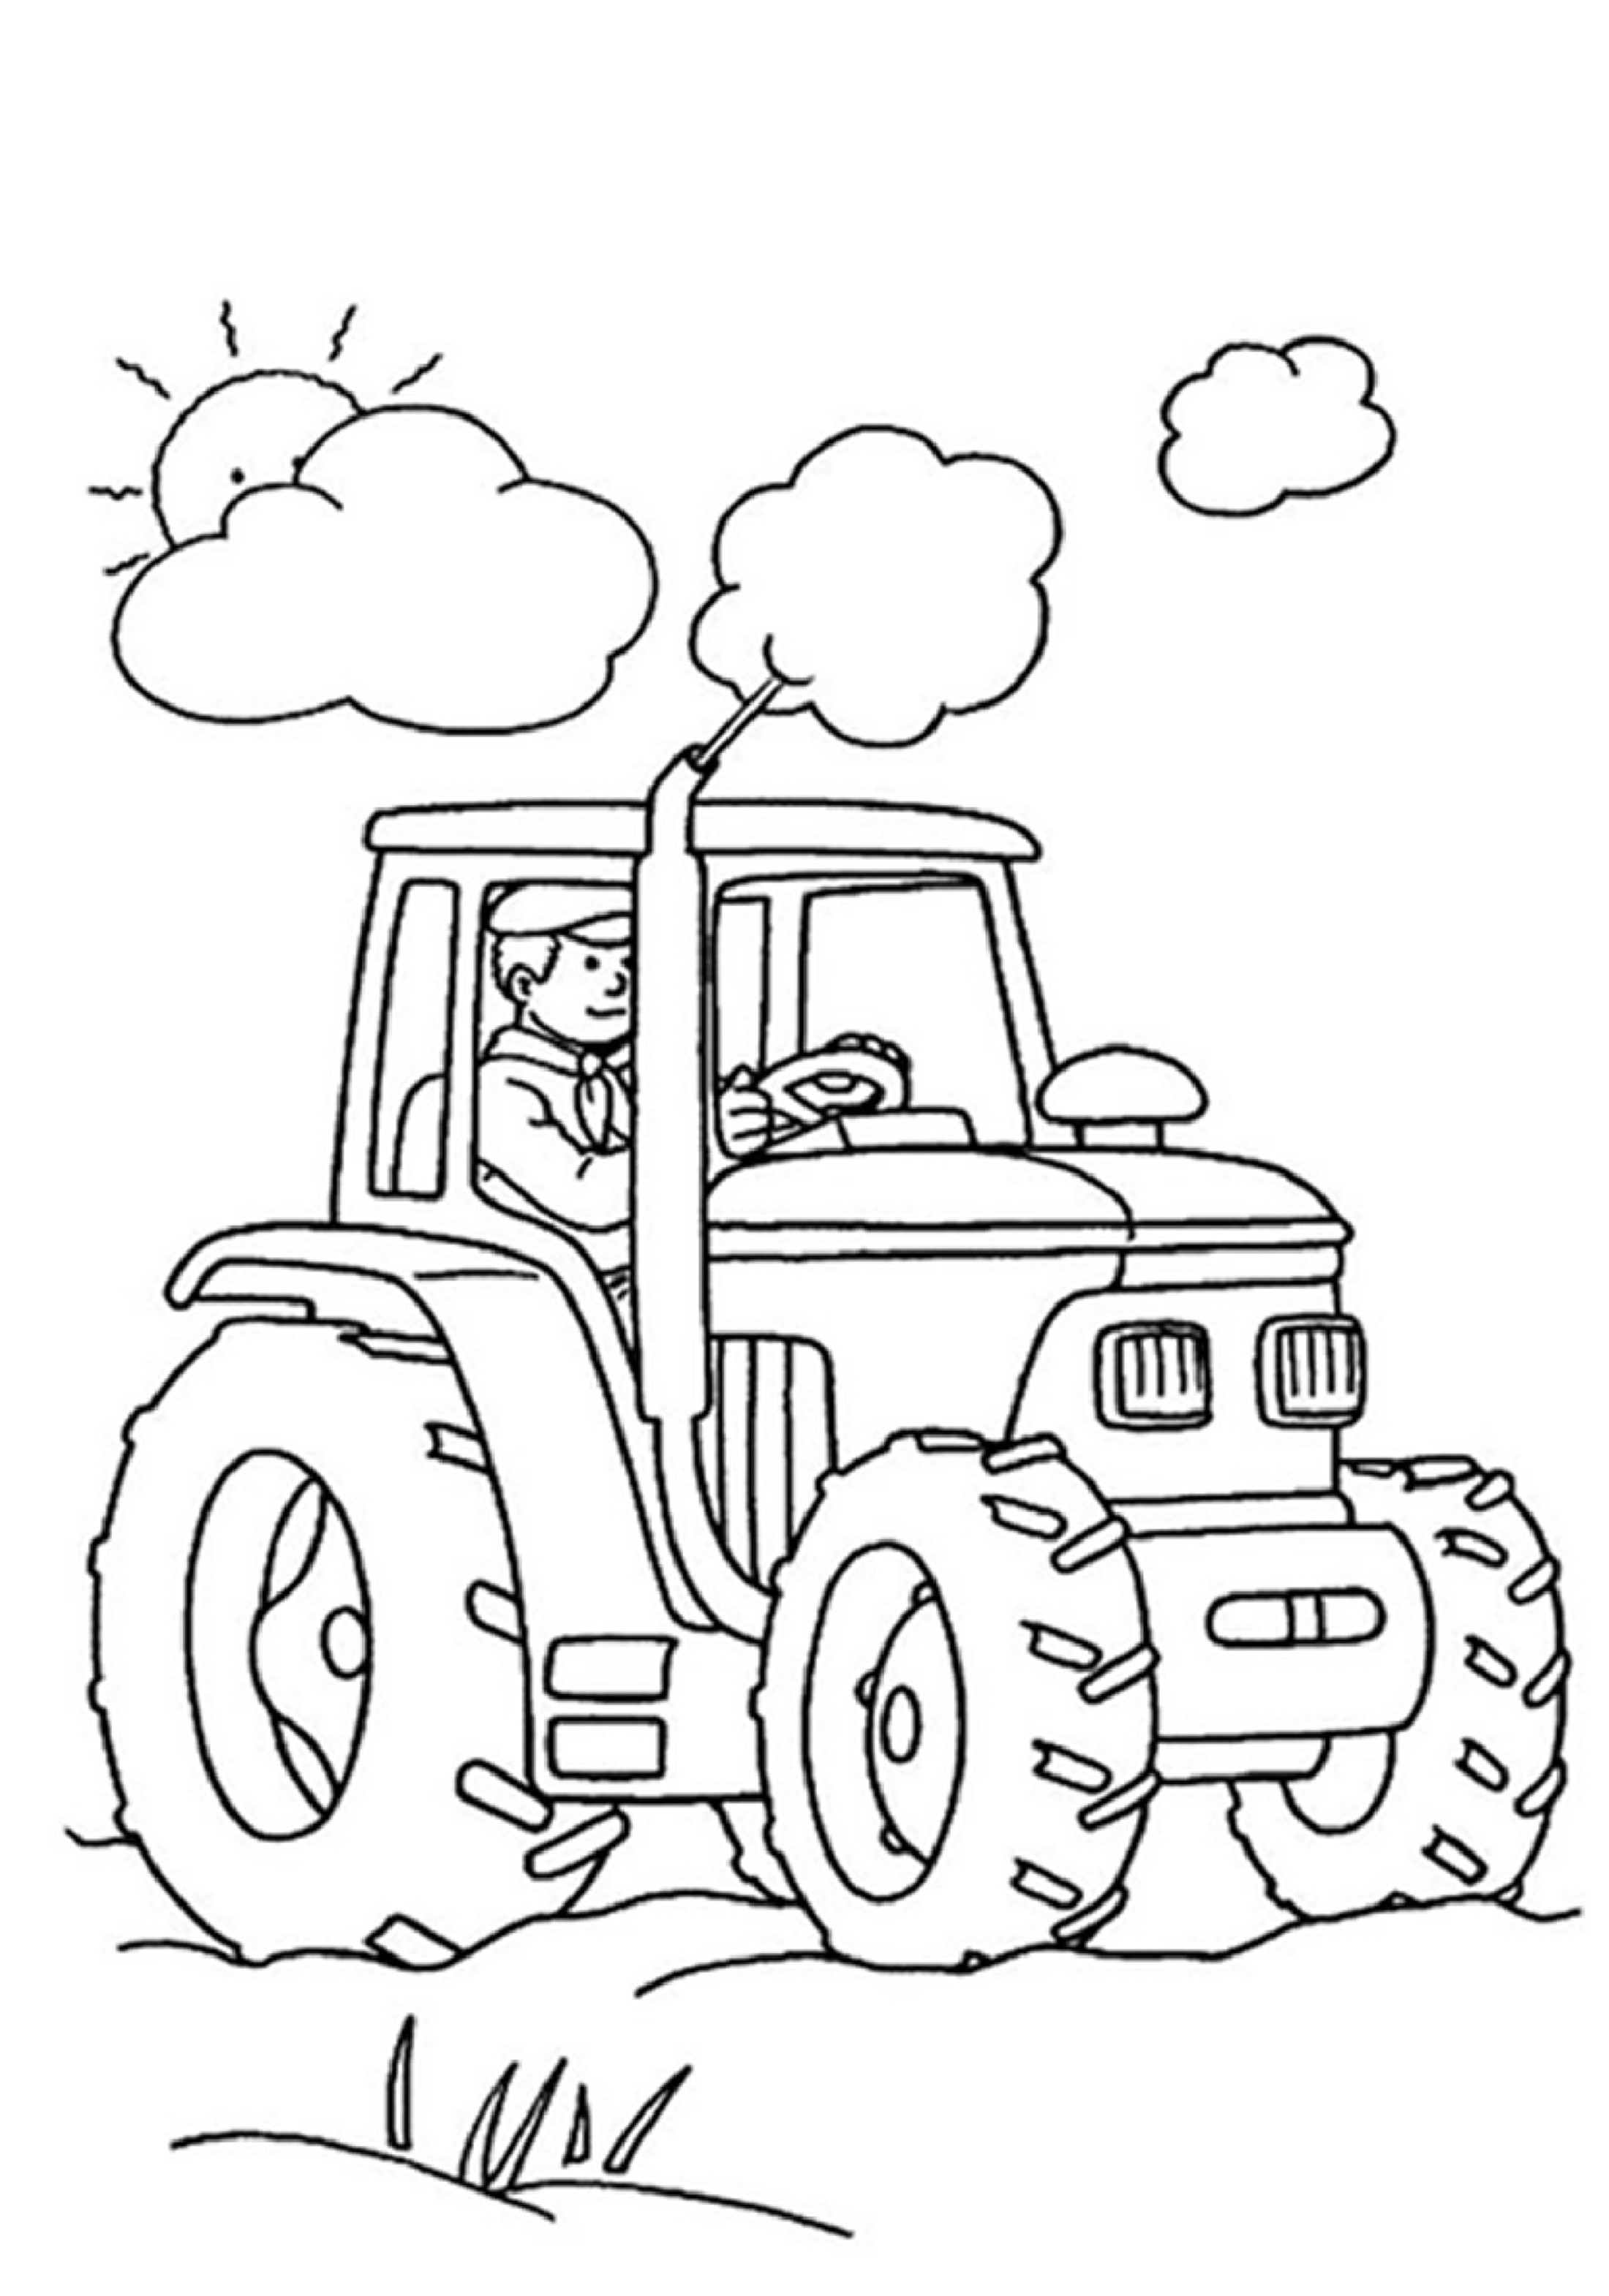 Free Coloring Pages For Boys
 bestcoloringpagekids